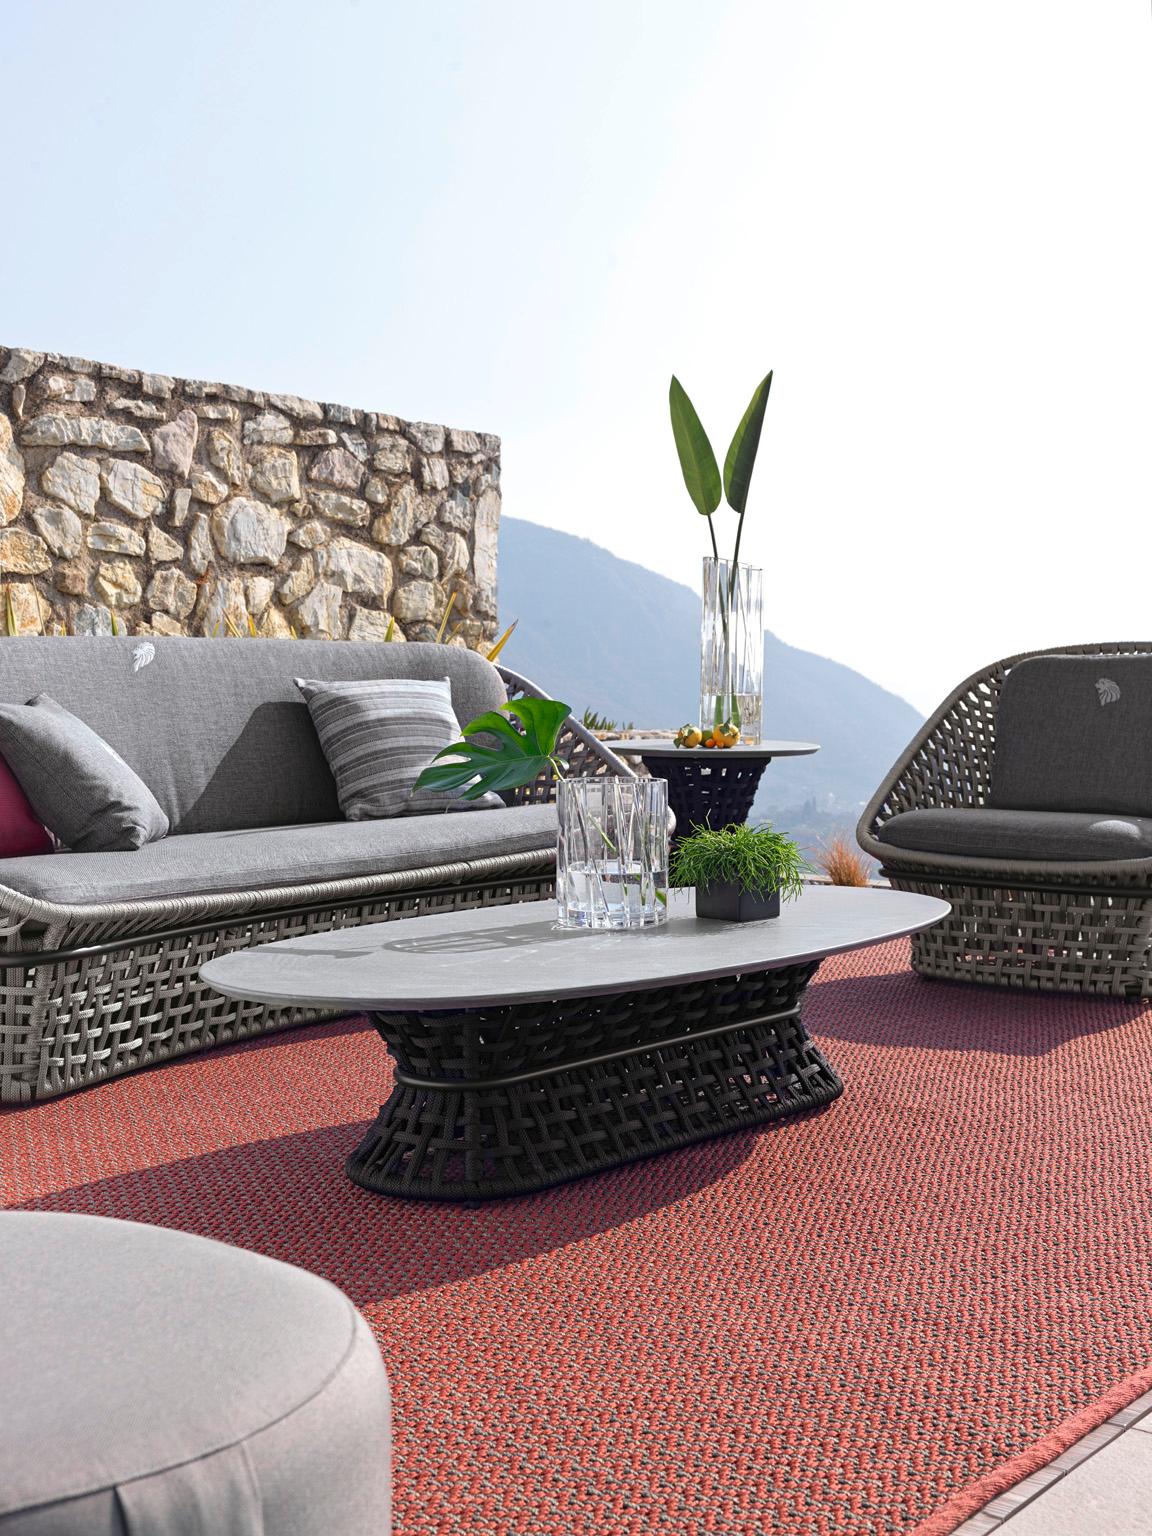 Giorgio Collection Dune Outdoor Collection
Outdoor oval cocktail table in combination of satined black metal
treated in cataphoresis and light grey woven cordage. Top made by slats
of treated 